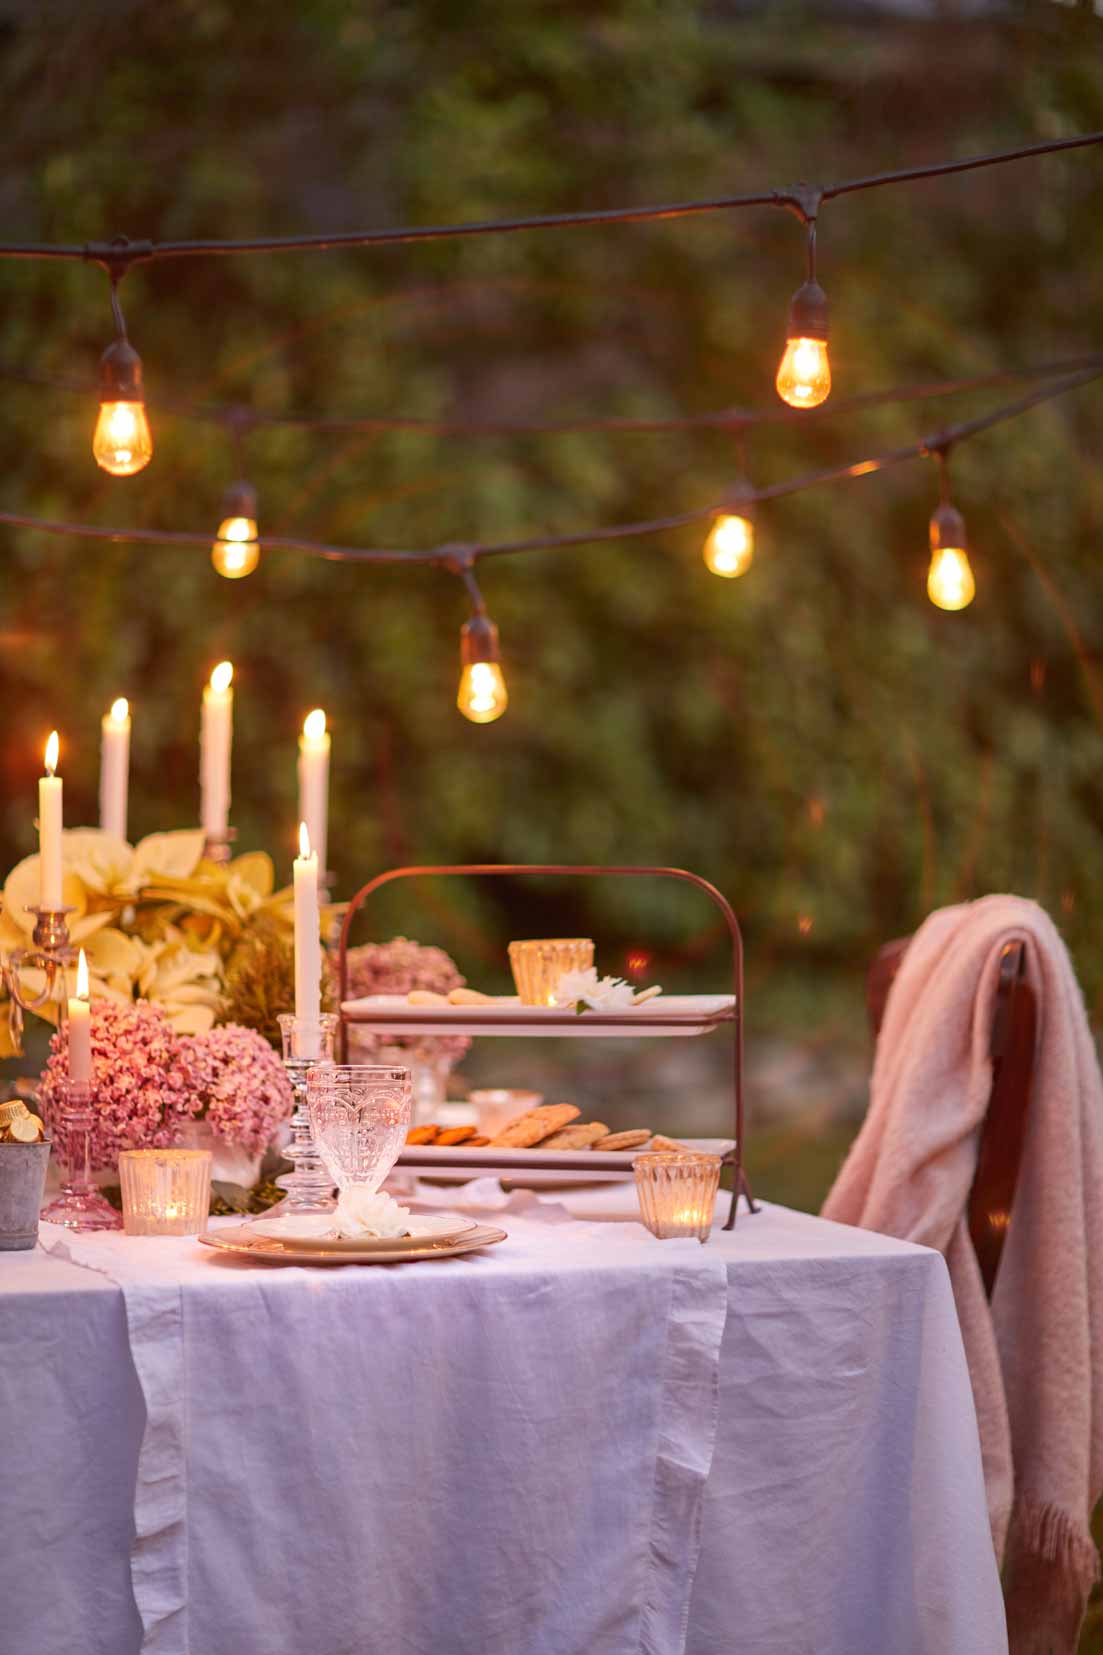 If you live in California, an outdoor Christmas dining is not out of the question. This gorgeous table is perfect for a holiday home night tour. See all the great Christmas decor on this blog hop of Christmas homes! #christmas #christmasdecor #holidays